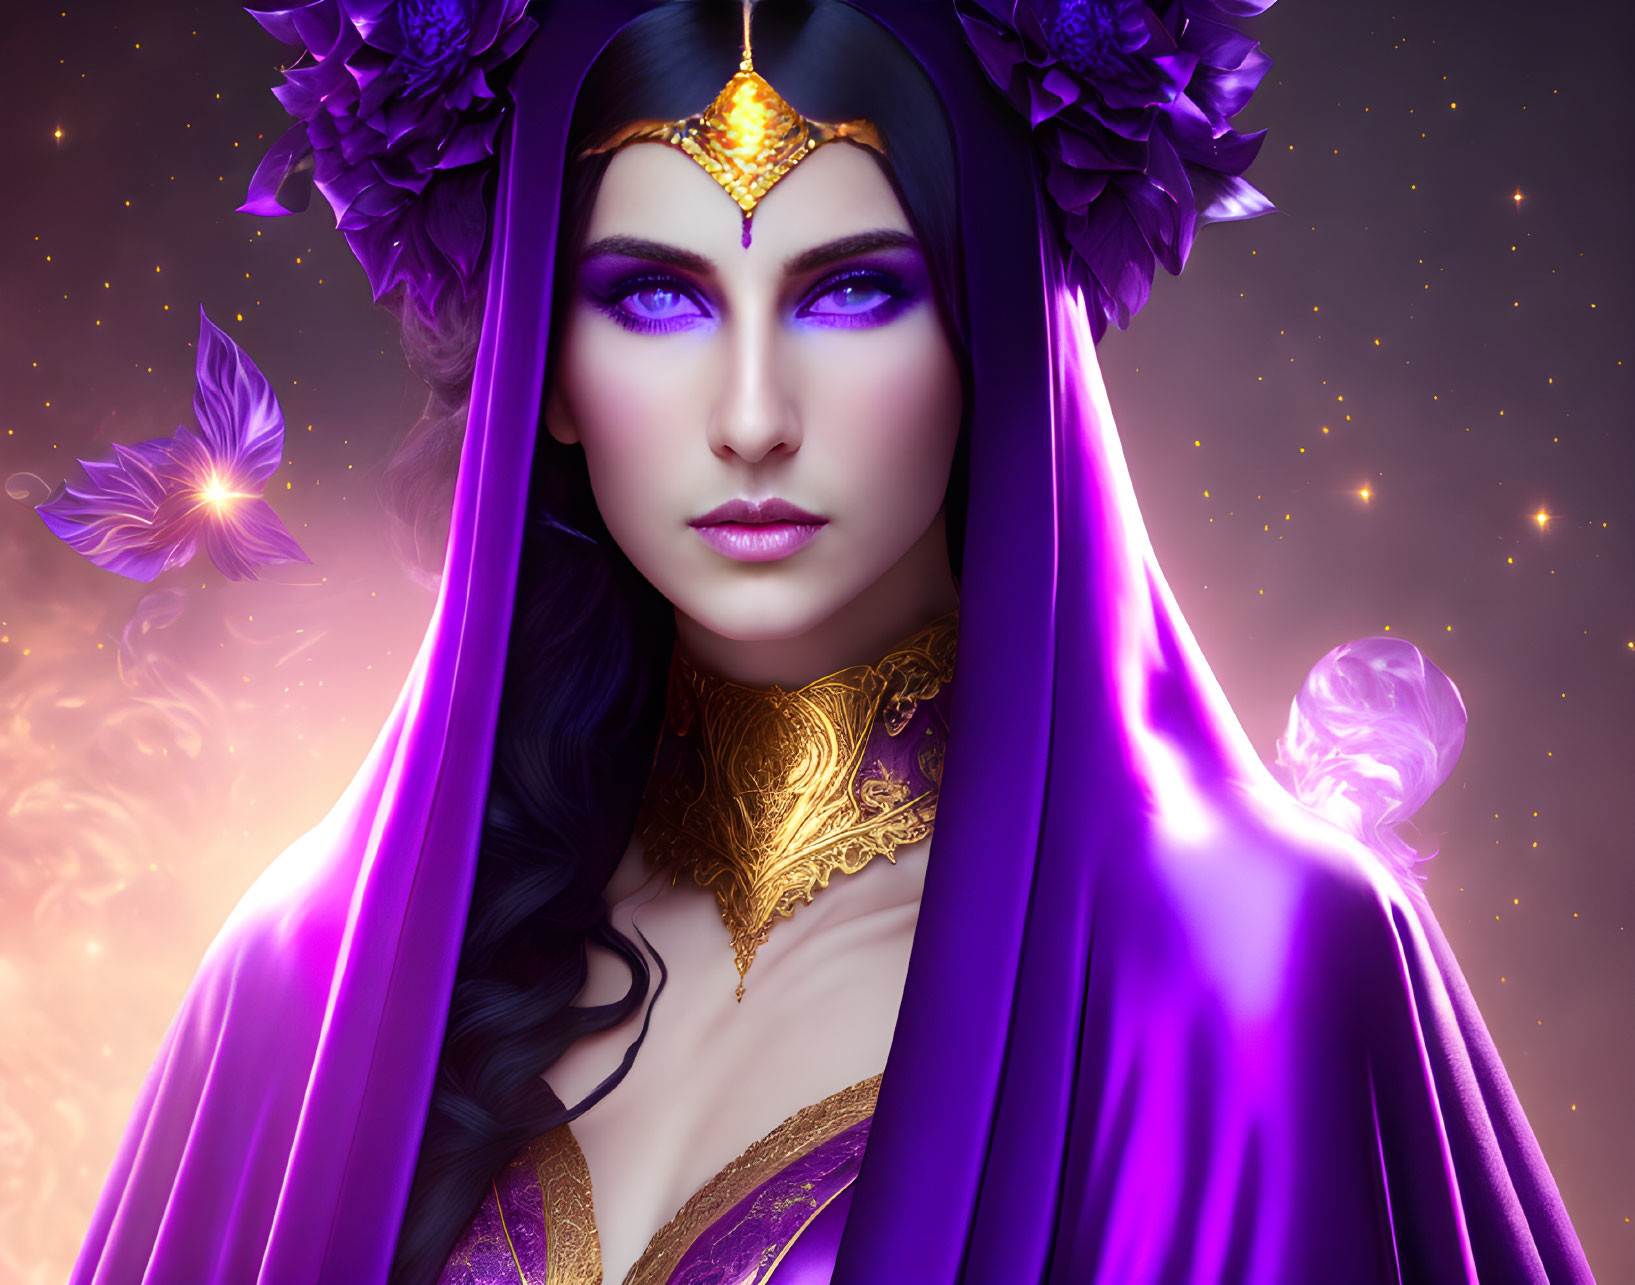 Mystical woman in purple attire with gold jewelry, butterflies, glowing orb, starry background